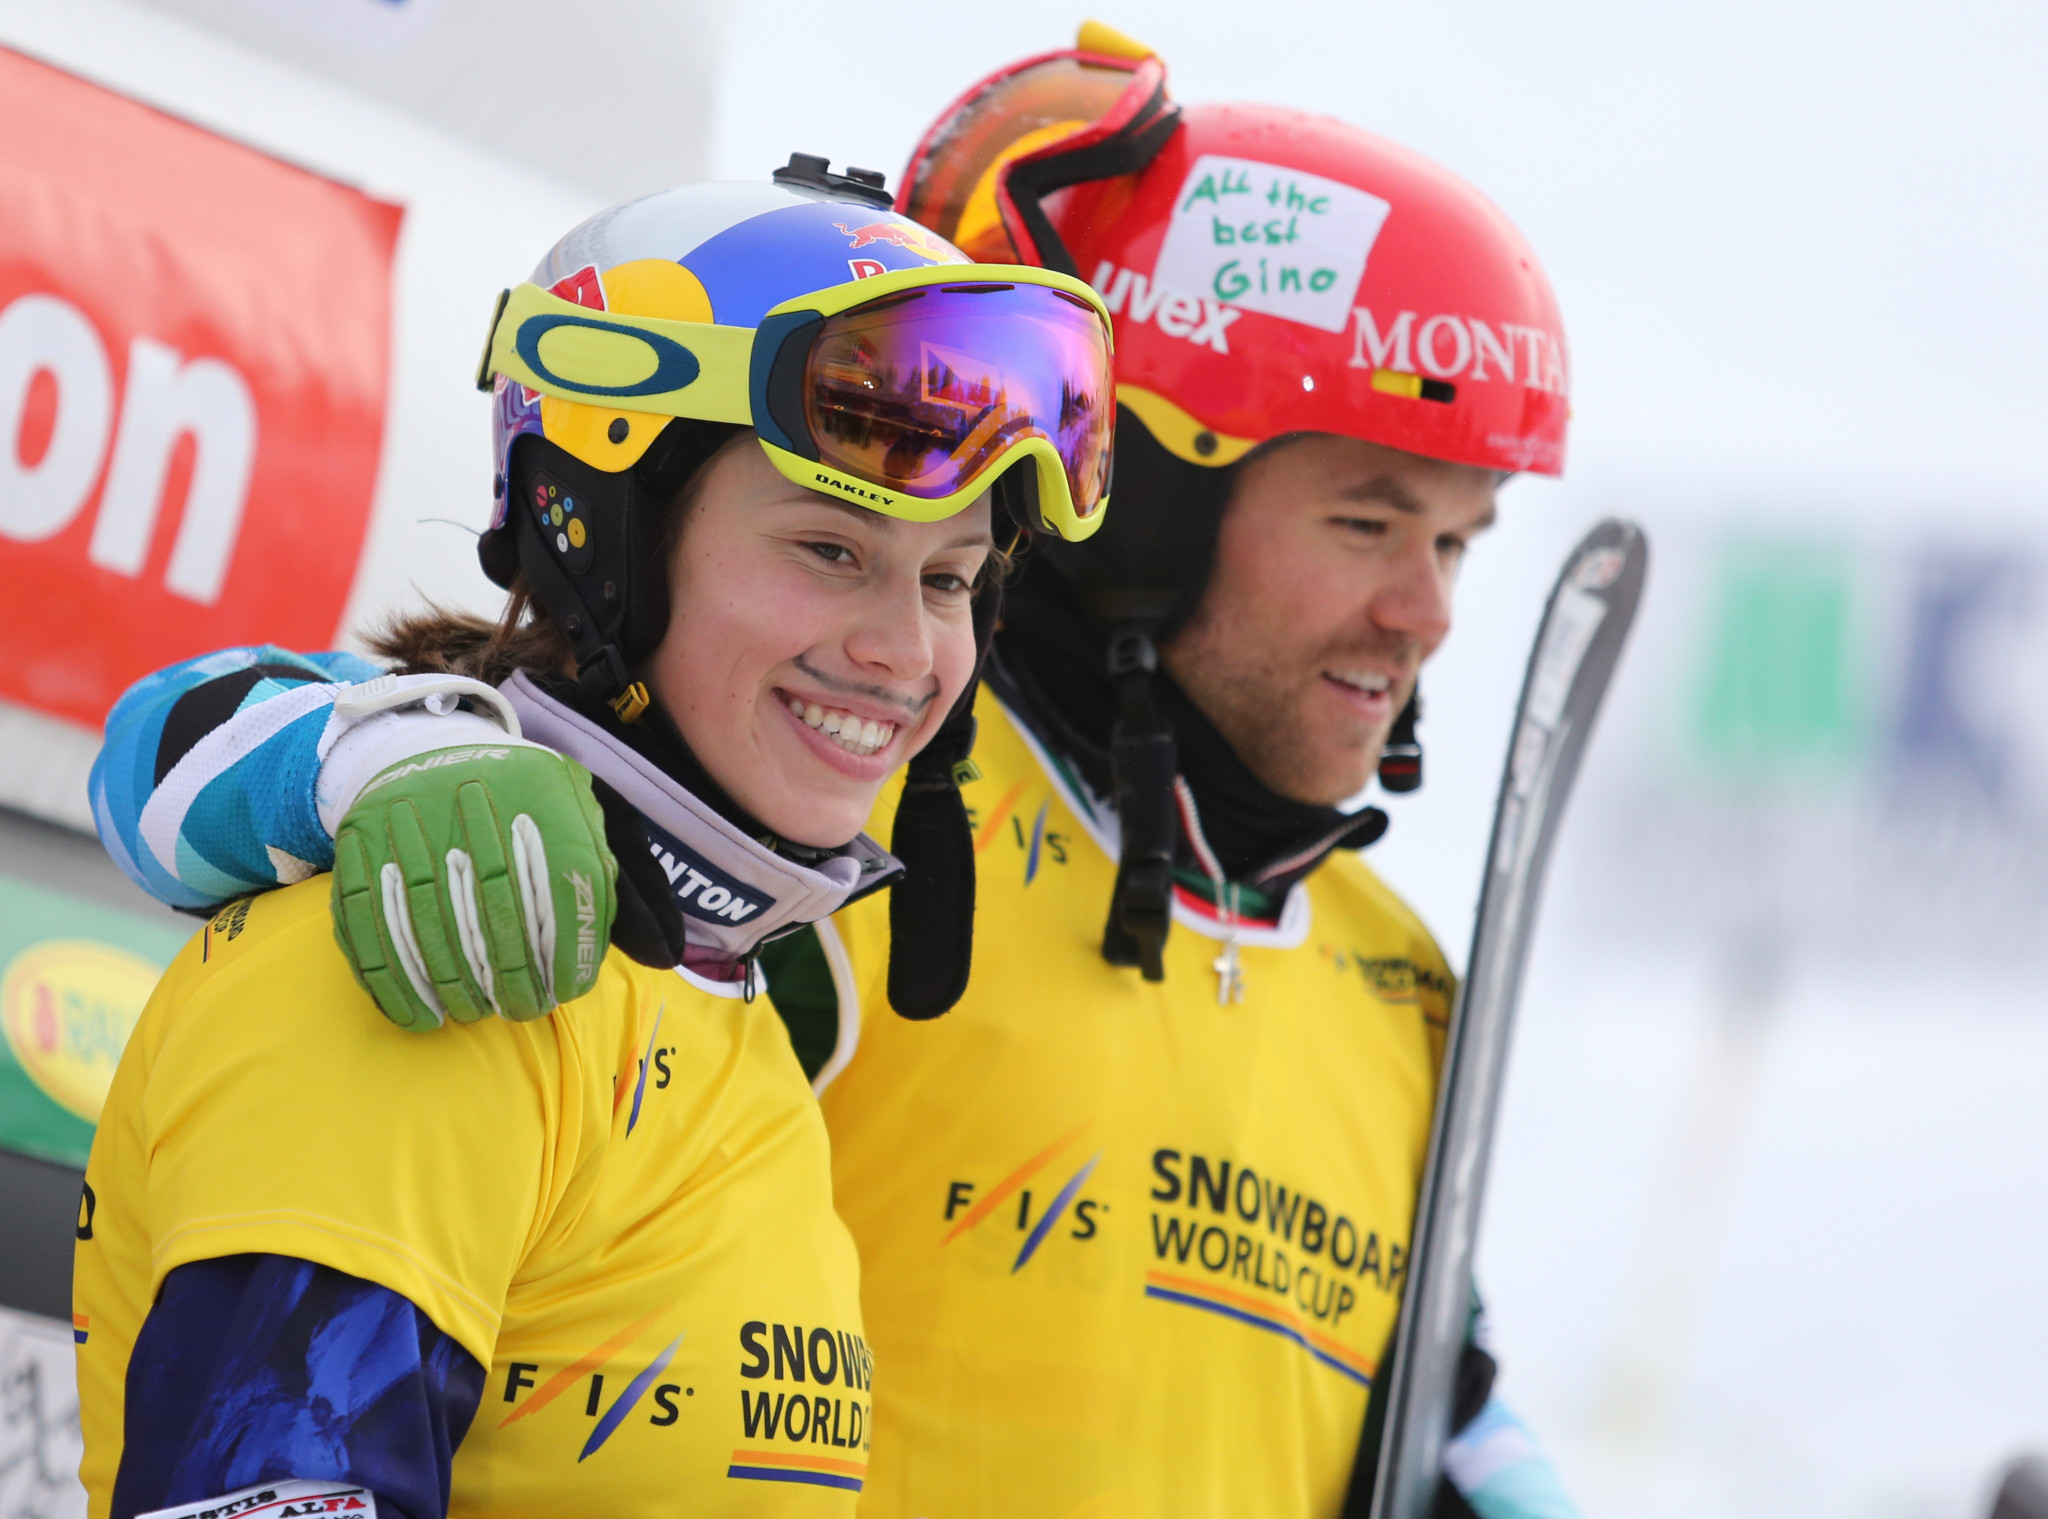 Samkova and Jacobellis swap places at FIS Snowboard Cross World Cup in Cervinia 